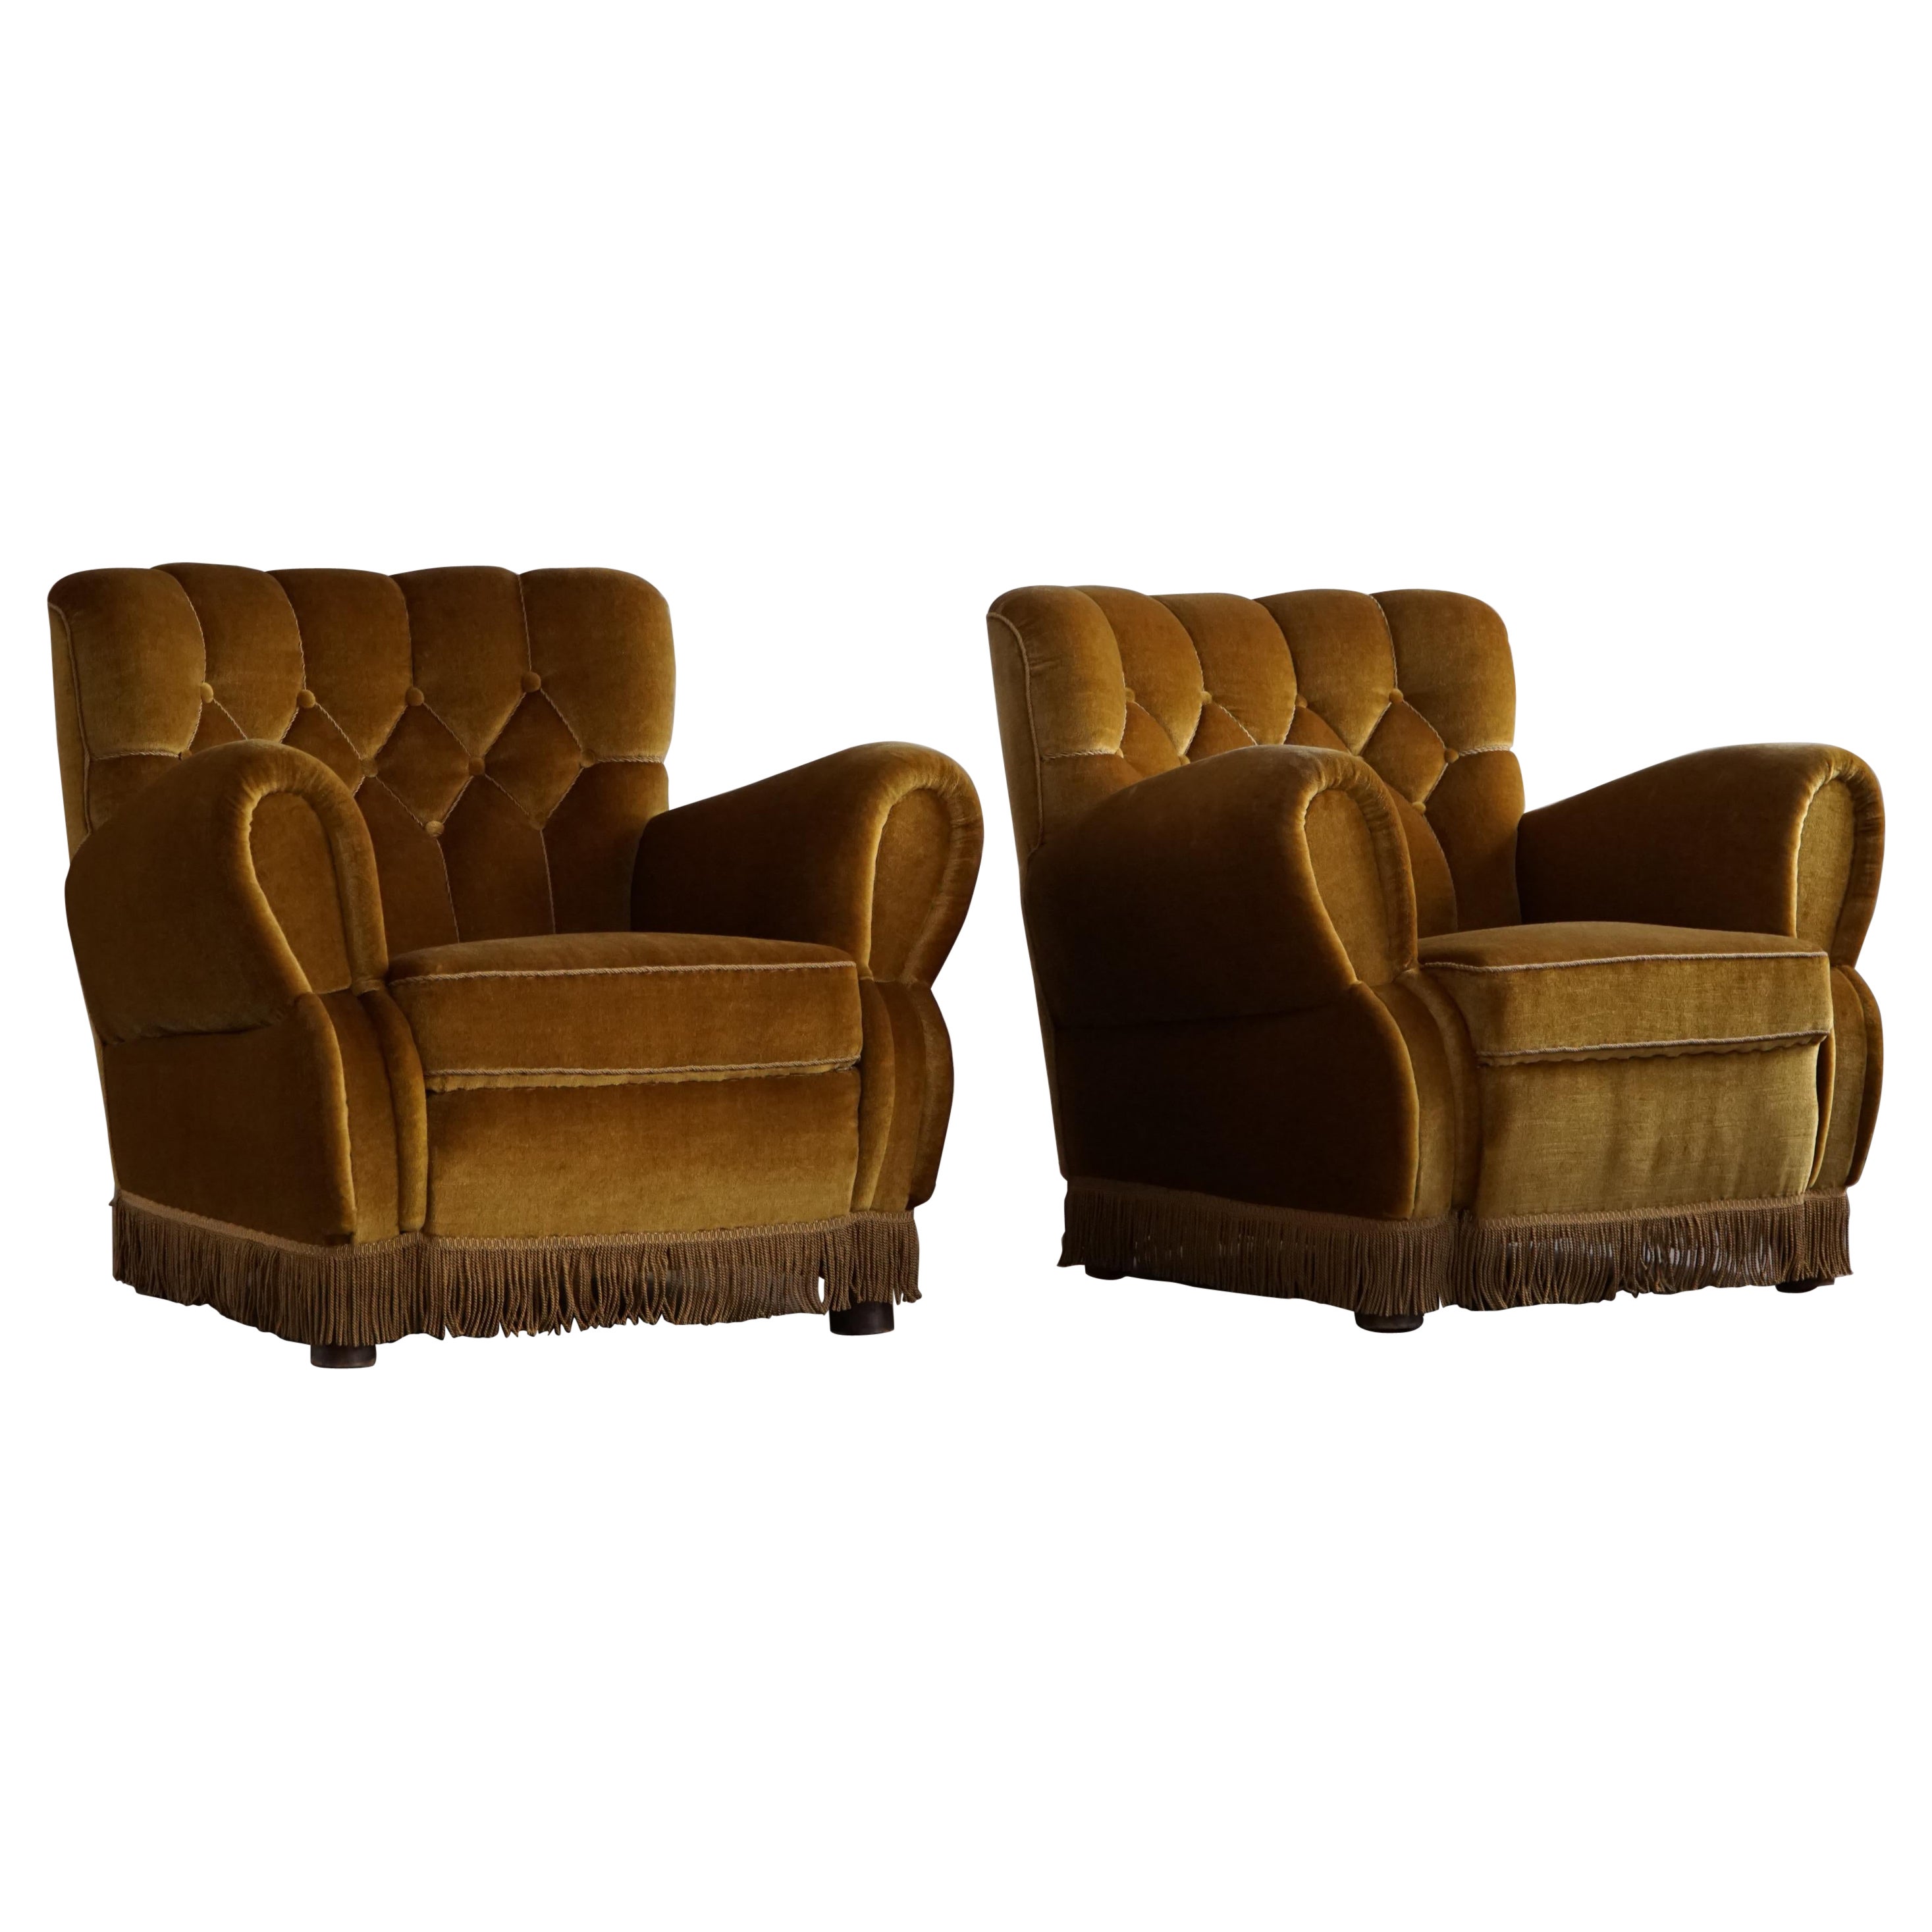 A Pair of Art Deco Lounge Chairs in Yellow Velour, Danish Carbinetmaker, 1940s For Sale